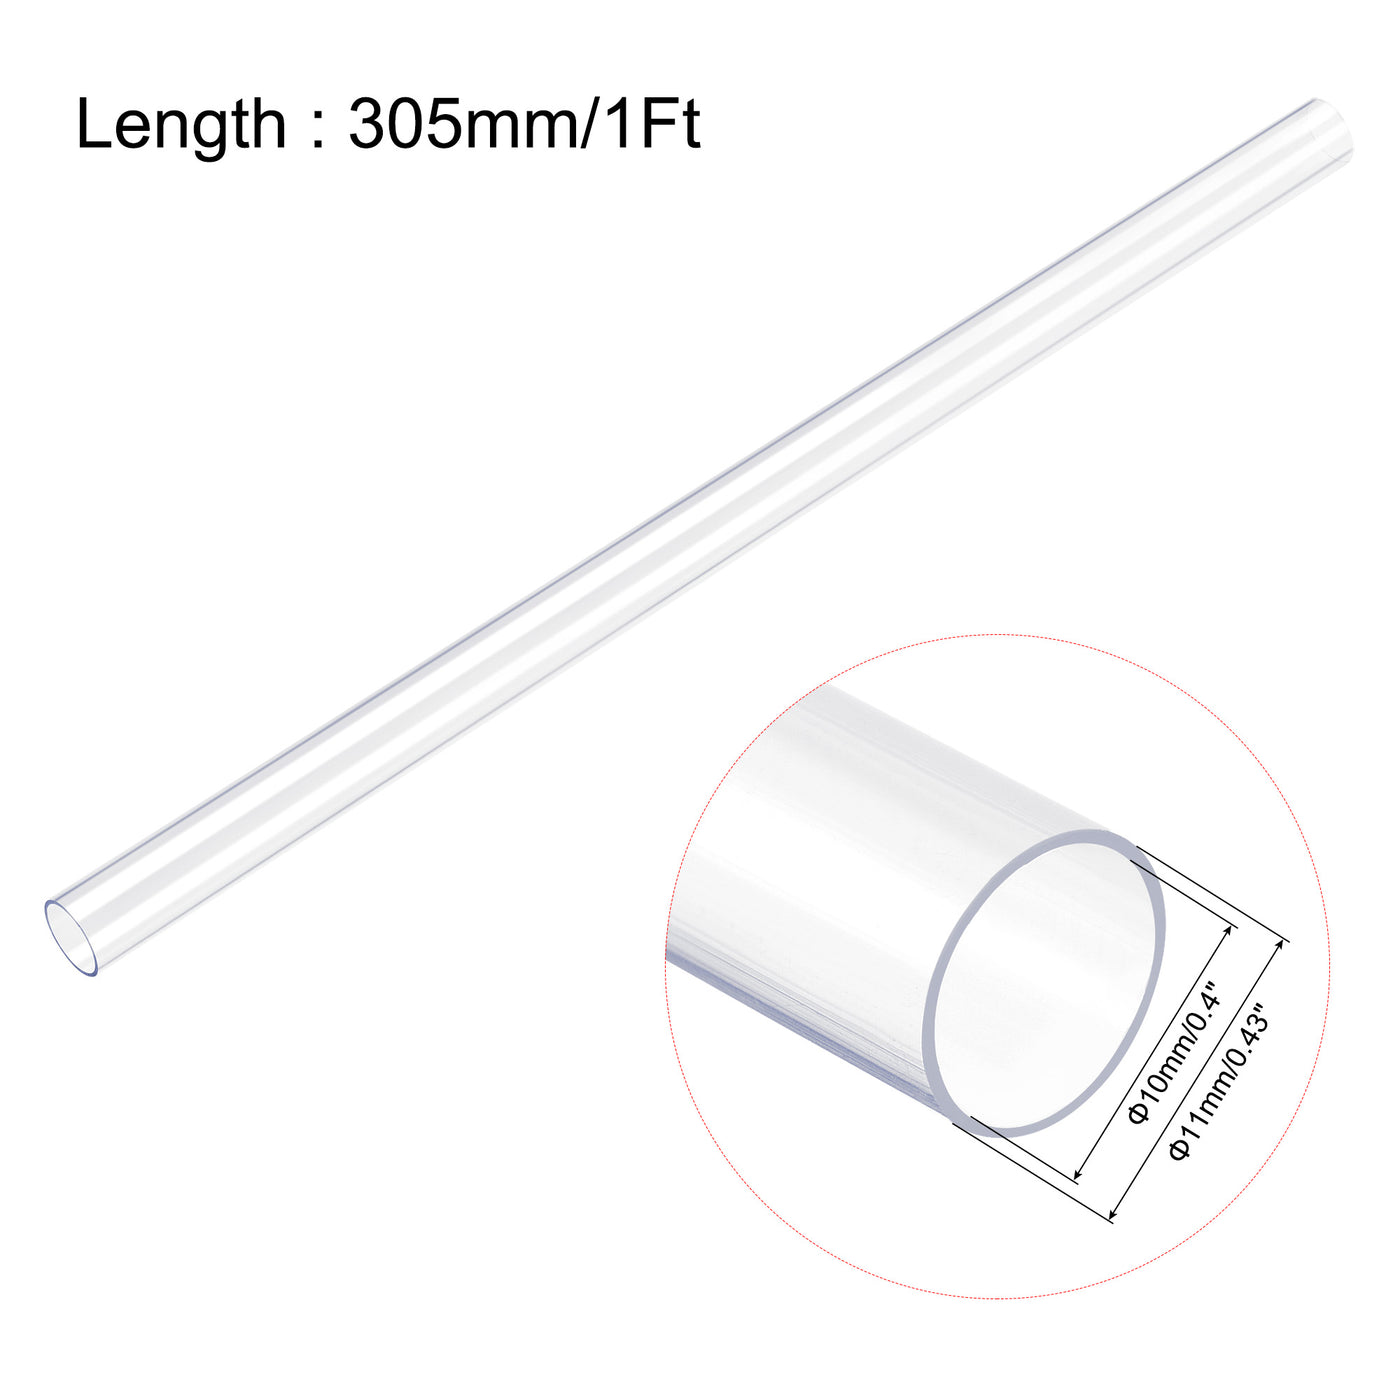 uxcell Uxcell Polycarbonate Rigid Round Tubing Plastic Tube